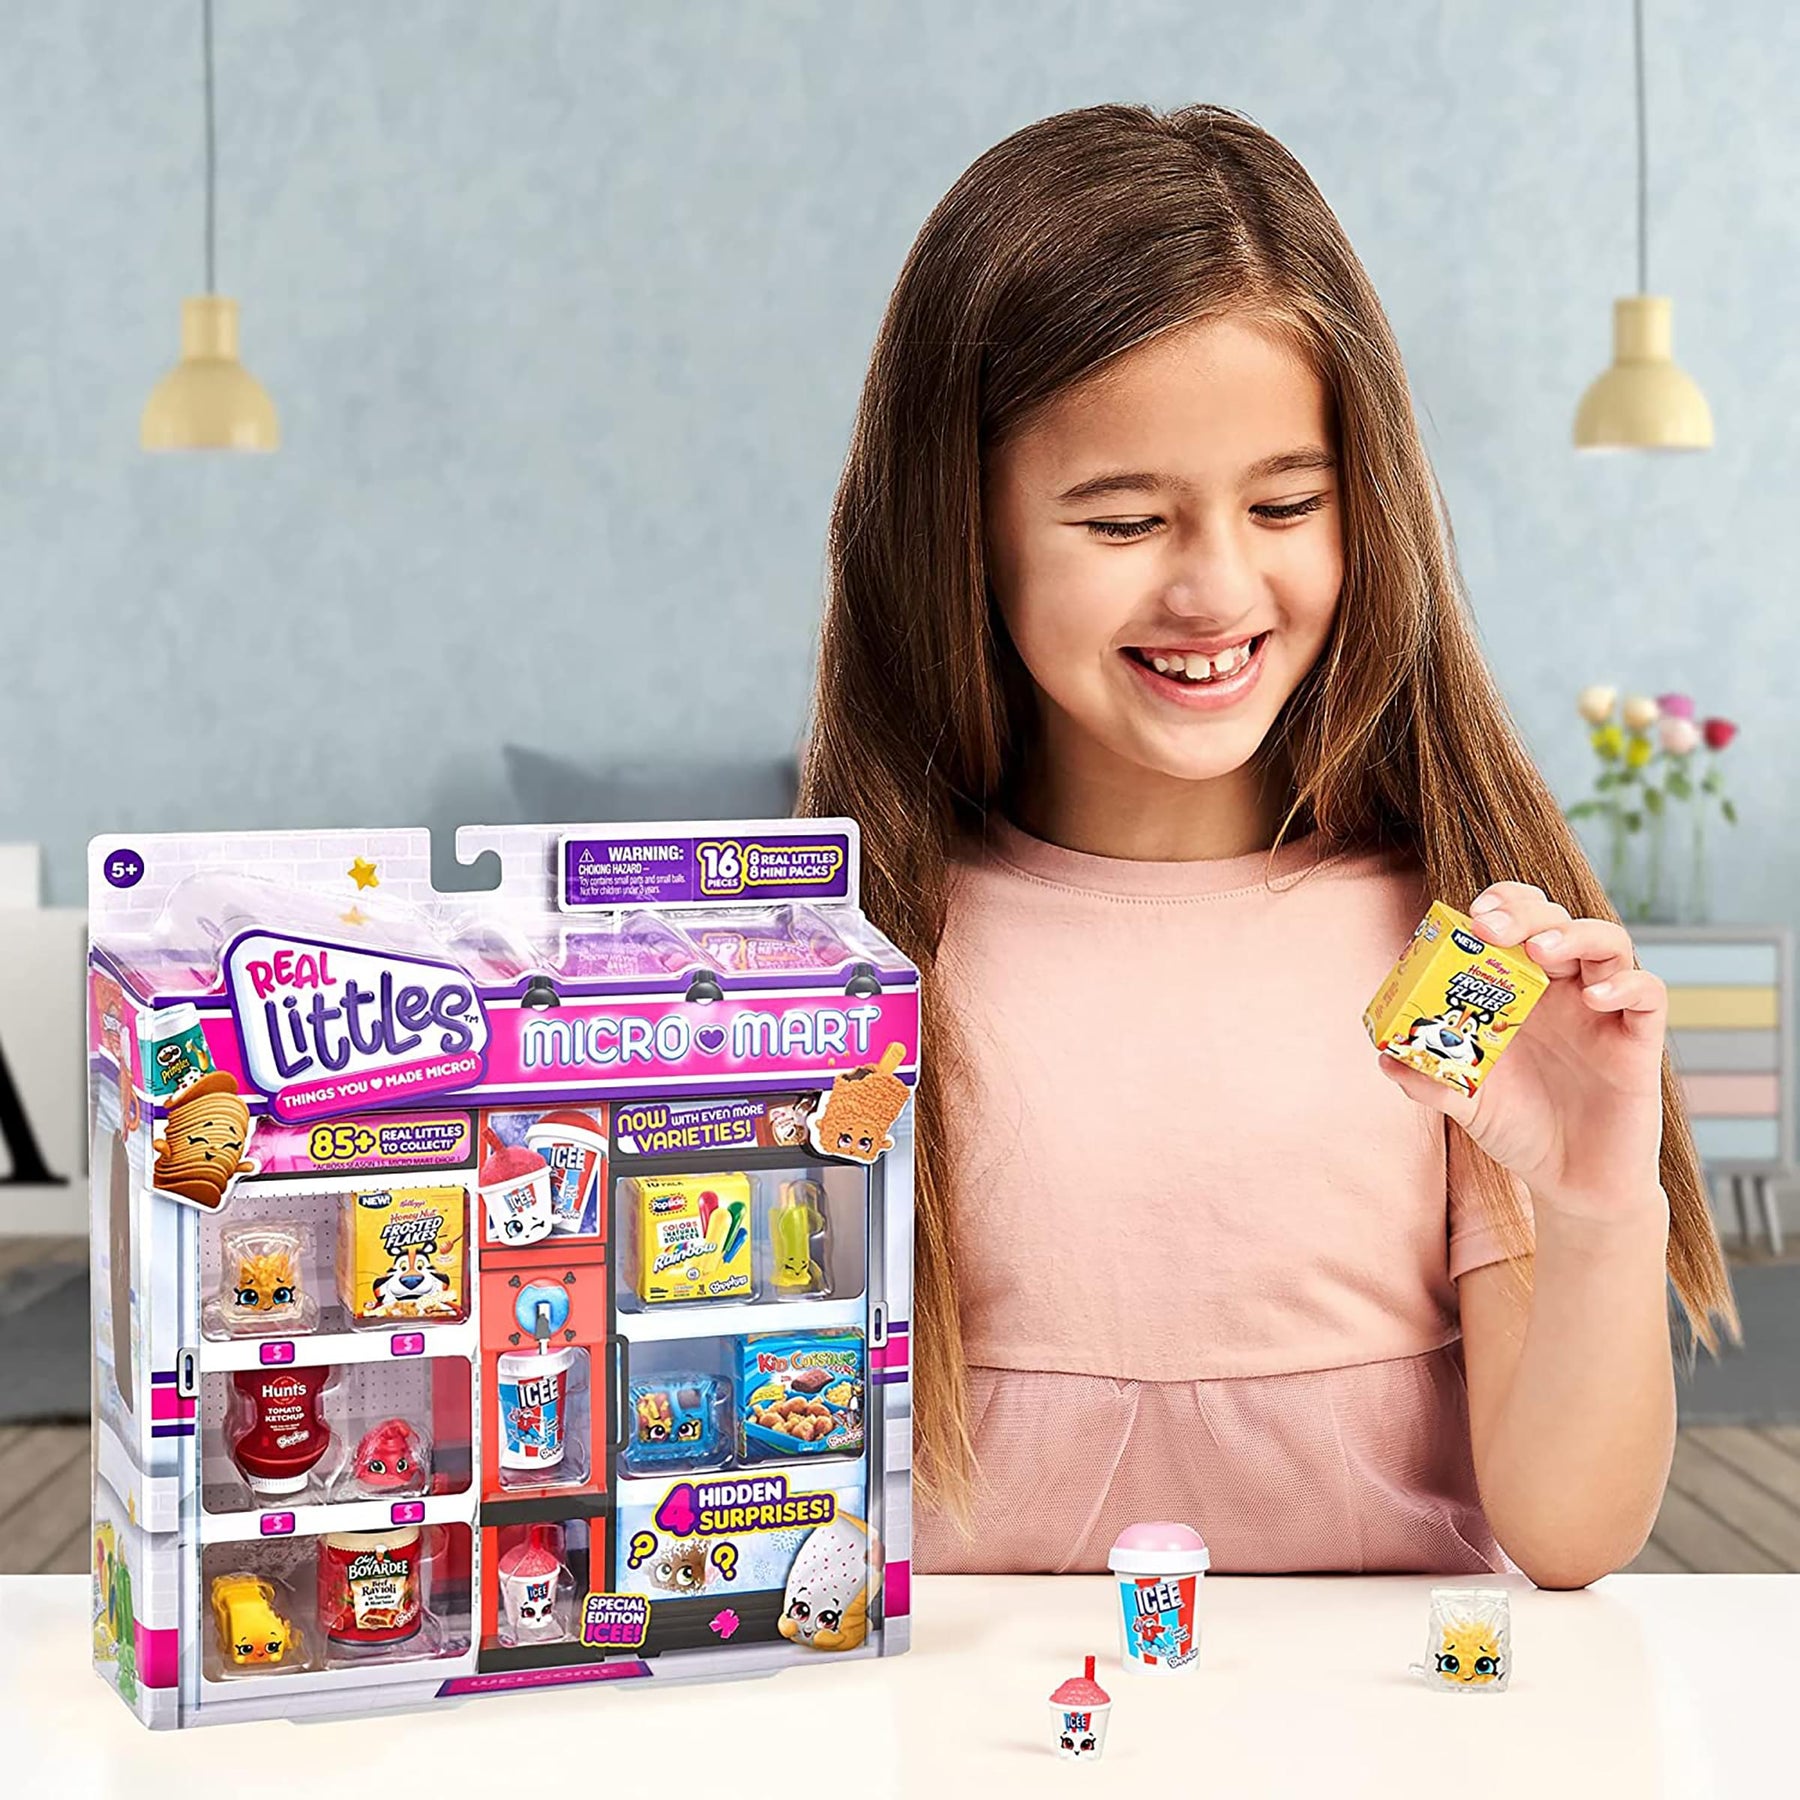 Shopkins Real Littles Collector Pack | Series 15 | One Random